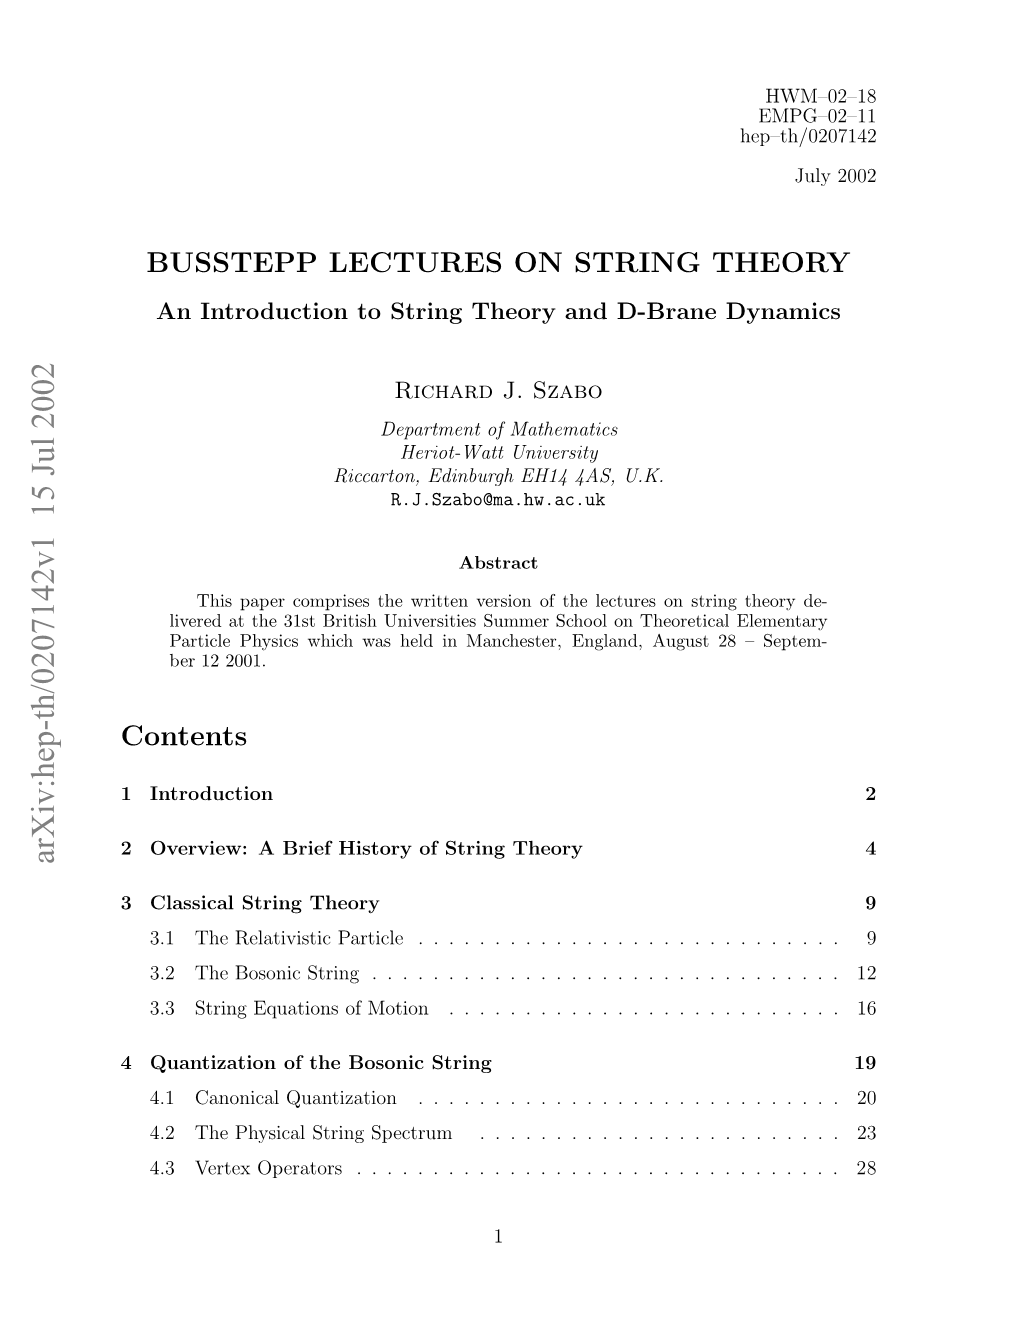 Busstepp Lectures on String Theory